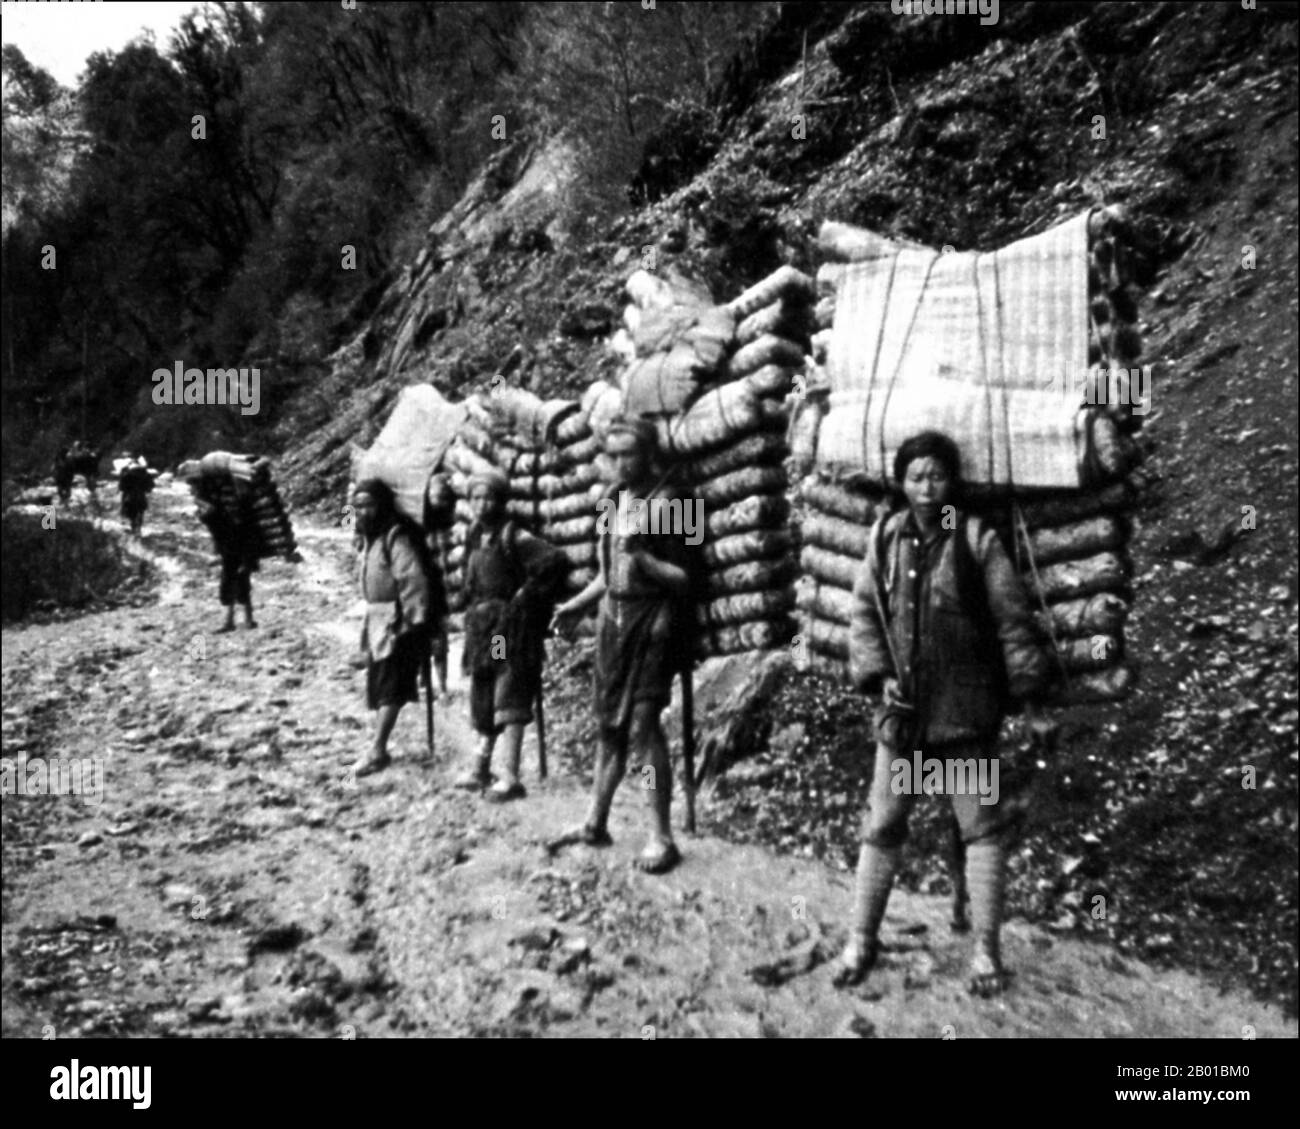 China: Tea Porters on Tea Horse Road, Western Sichuan. Photo by Ernest Henry Wilson (15 February 1876 - 15 October 1930), c. 1908.  The Tea Horse Road (Cha Ma Dao) was a network of mule caravan paths winding through the mountains of Yunnan, Sichuan and Tibet in Southwest China. It is also sometimes referred to as the Southern Silk Road and Ancient Tea Horse Road. From around a thousand years ago, the Ancient Tea Route was a trade link from Yunnan, one of the first tea-producing regions, to India via Burma, to Tibet, and to central China via Sichuan Province. Stock Photo